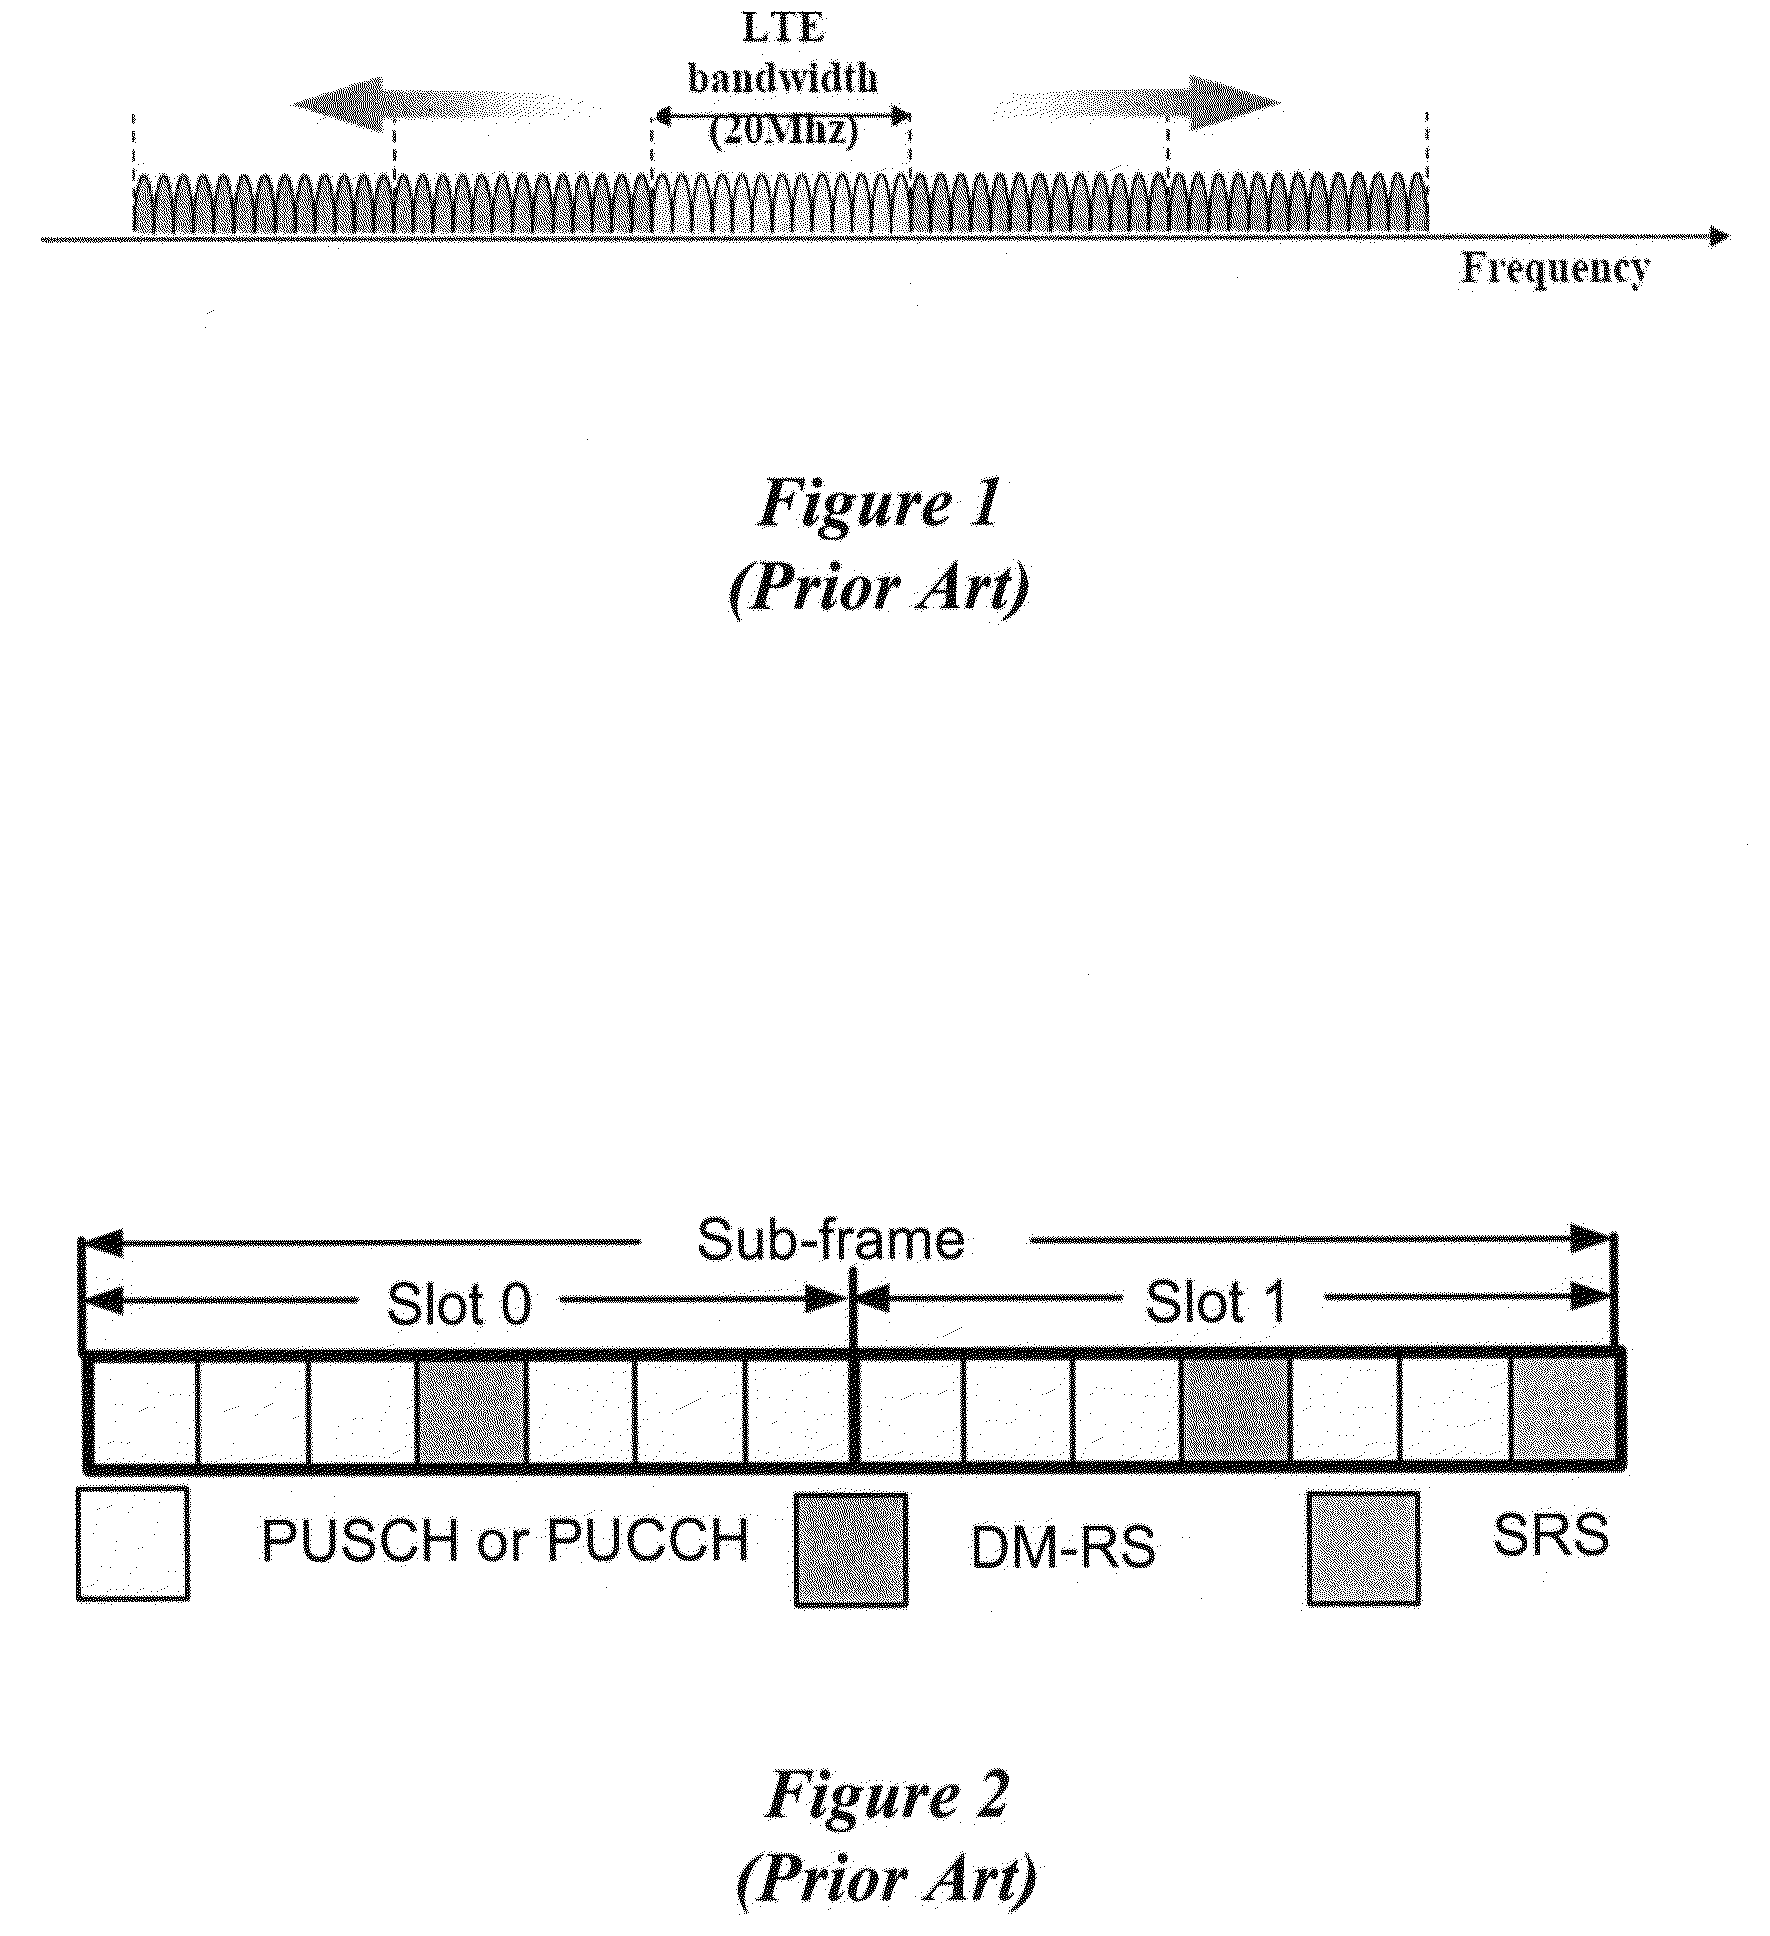 Sounding reference signal transmission in carrier aggregation